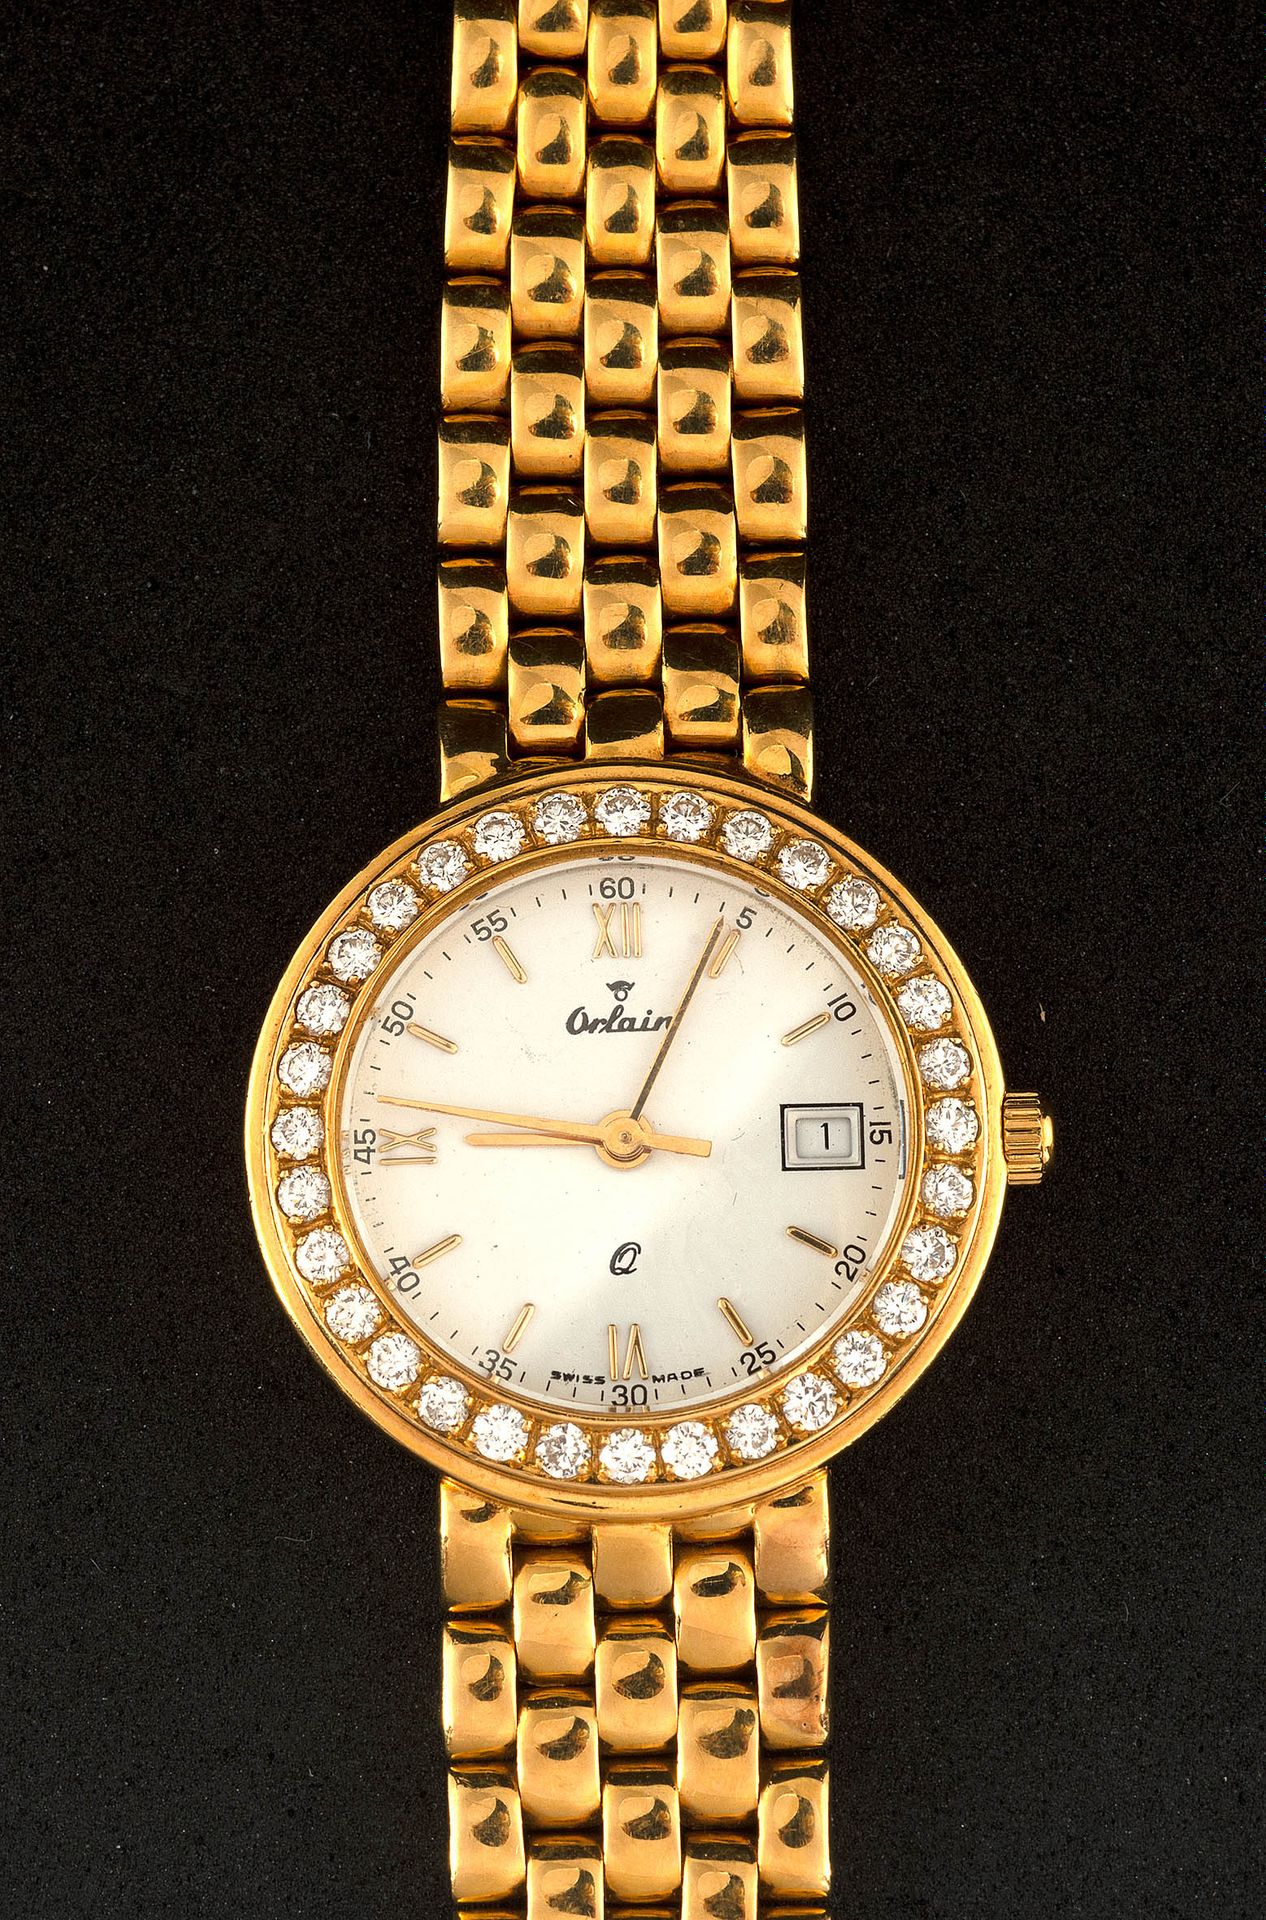 Null Ladies' watch in 18K yellow gold, Orlain brand, set with brilliant-cut diam&hellip;